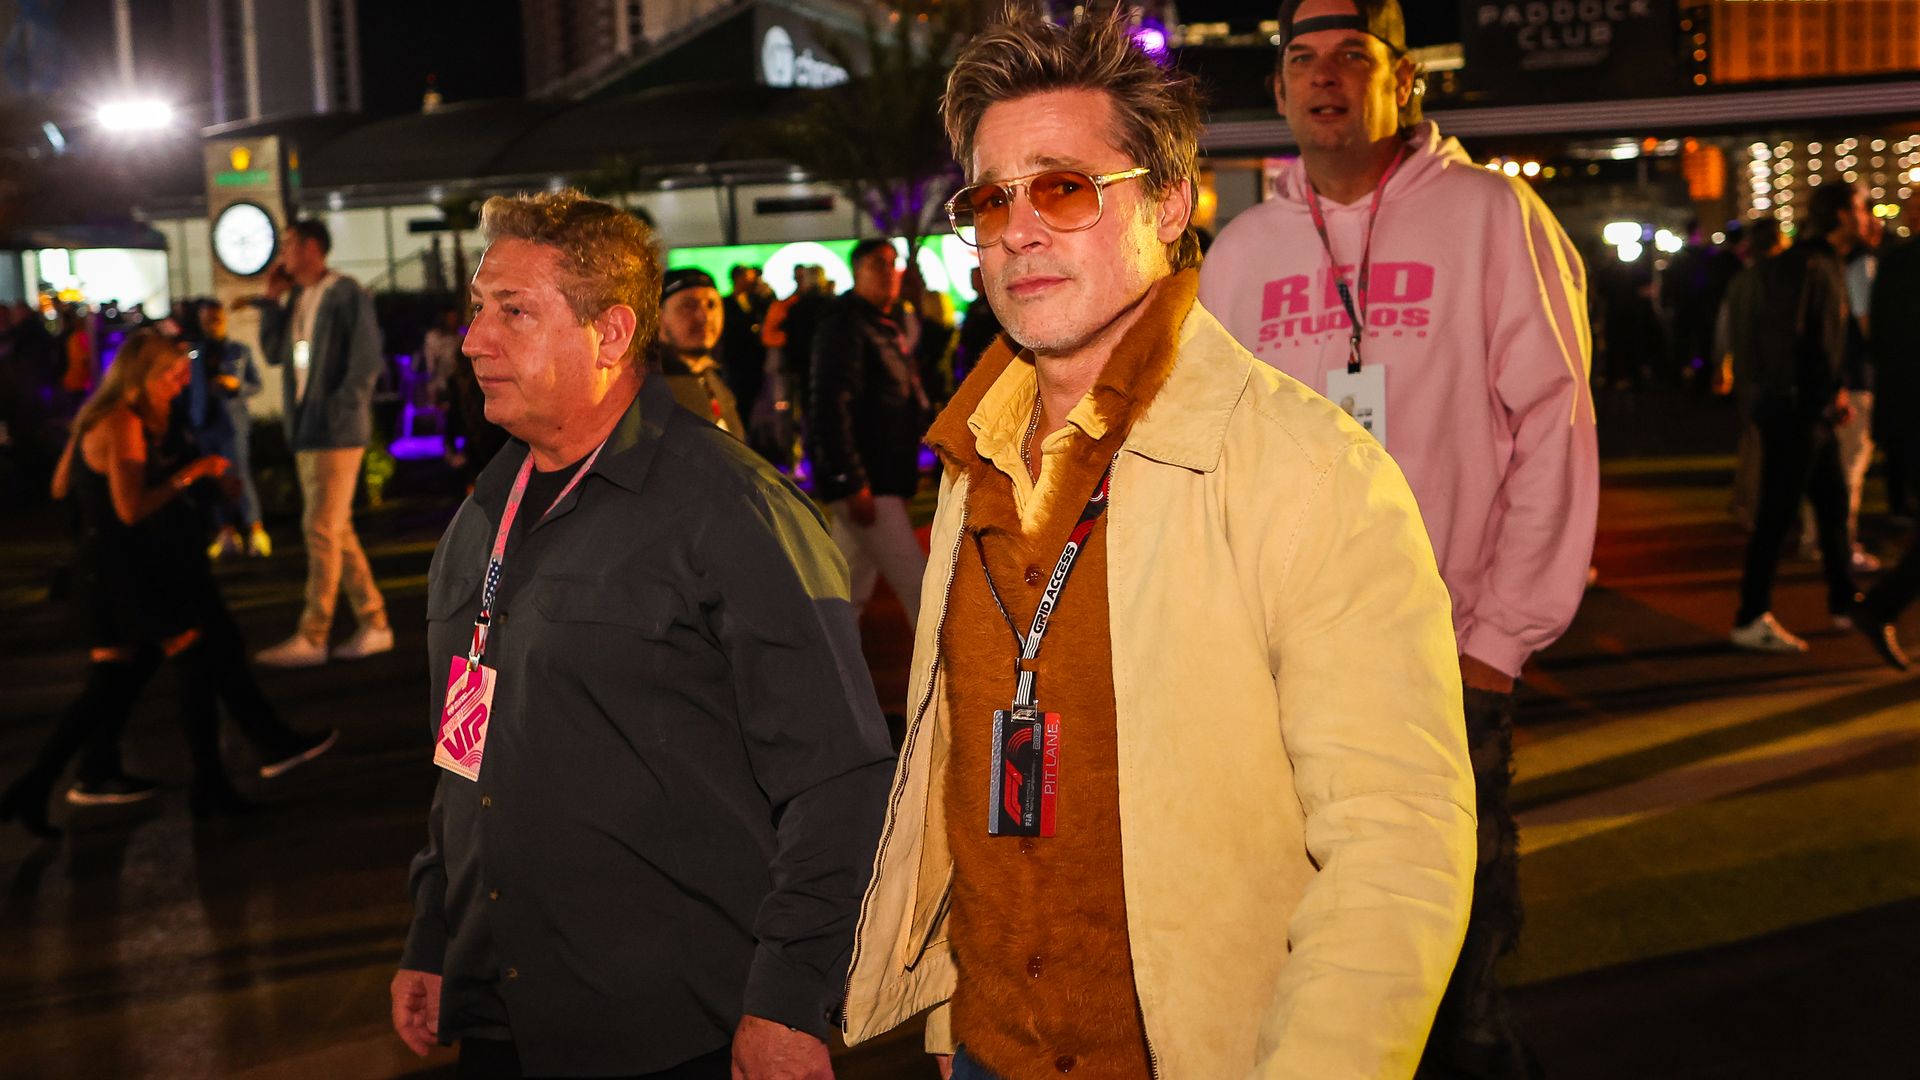 Brad Pitt channels Fight Club character Tyler Durden as he arrives at F1 Grand Prix